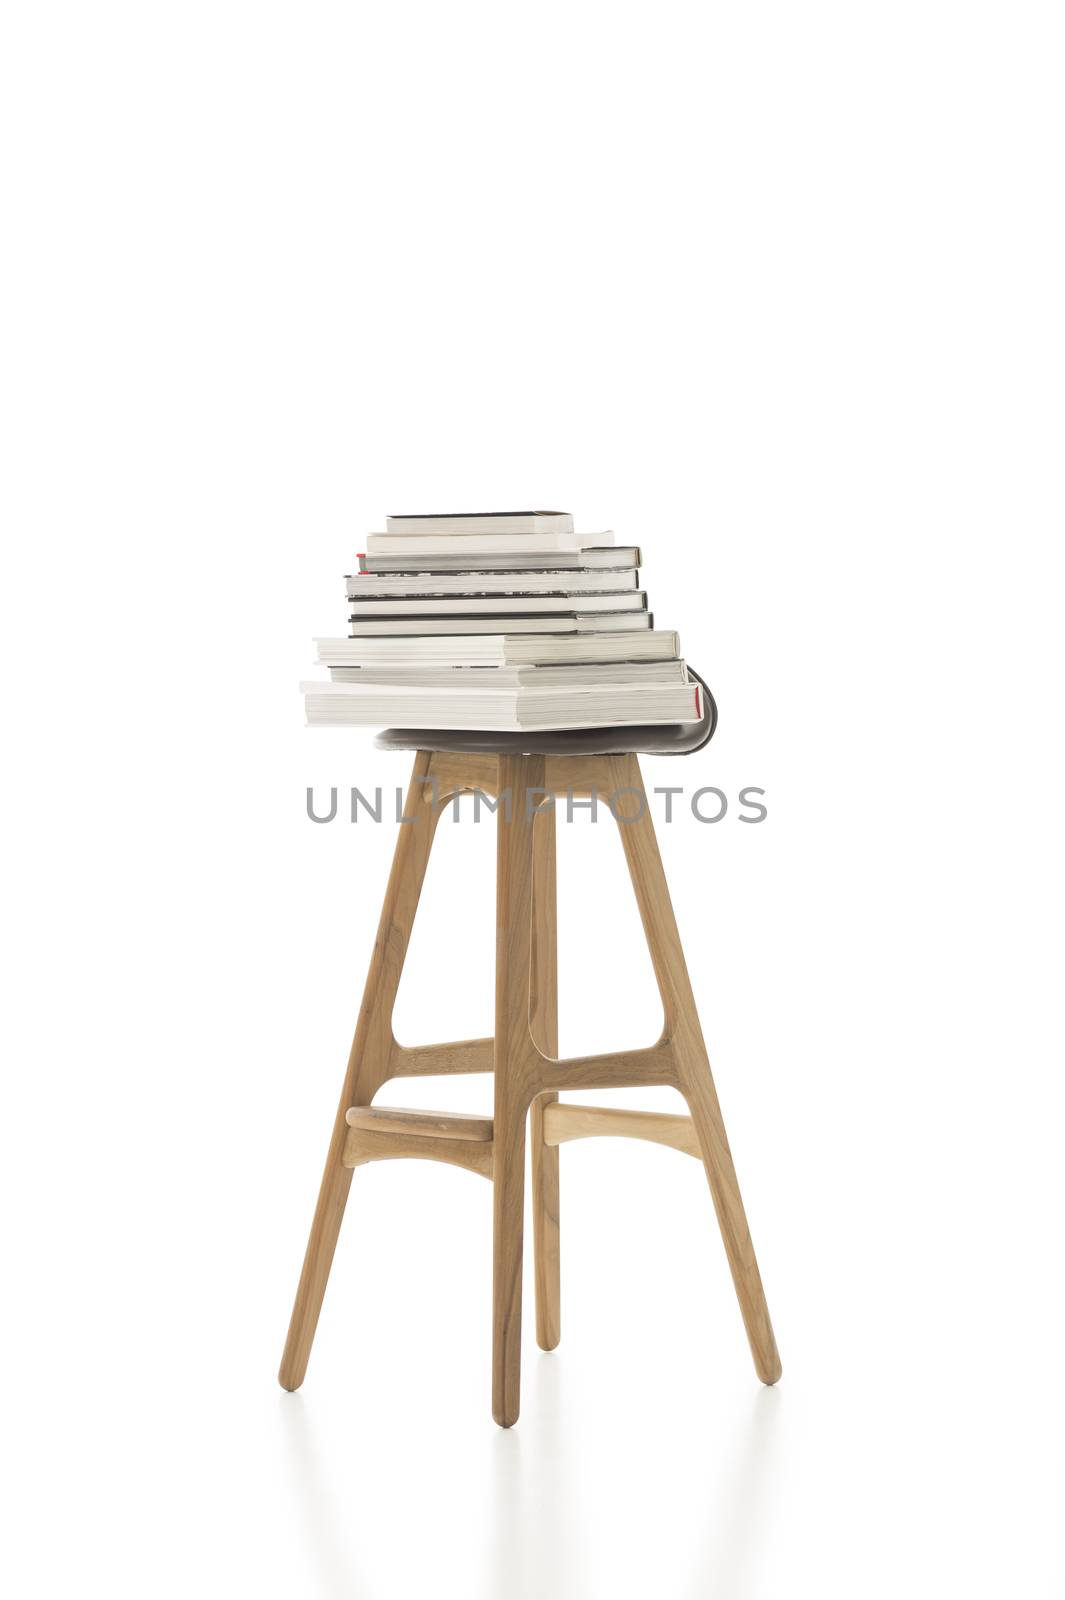 Piled Books on Top of Tall Single Chair by MOELLERTHOMSEN